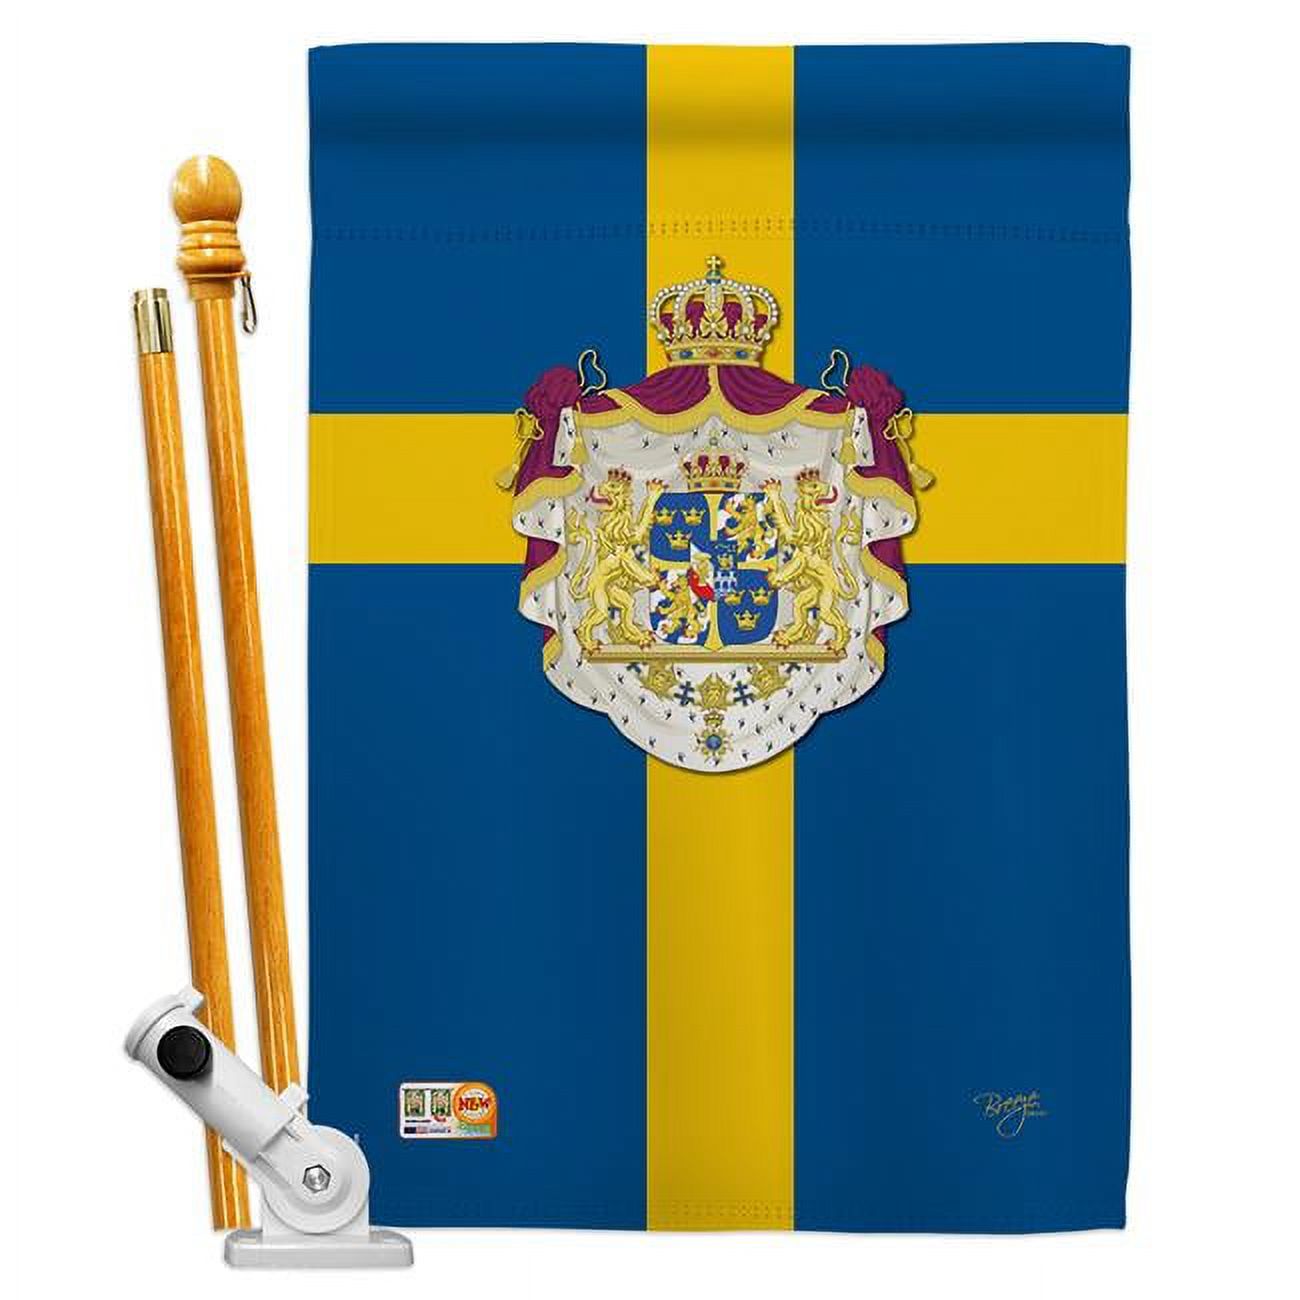 Breeze Decor BD-CY-HS-108091-IP-BO-D-US13-BD 28 x 40 in. Sweden Flags of the World Nationality Impressions Decorative Vertical Double Sided House Flag Set with Pole Bracket & Hardware - image 1 of 1